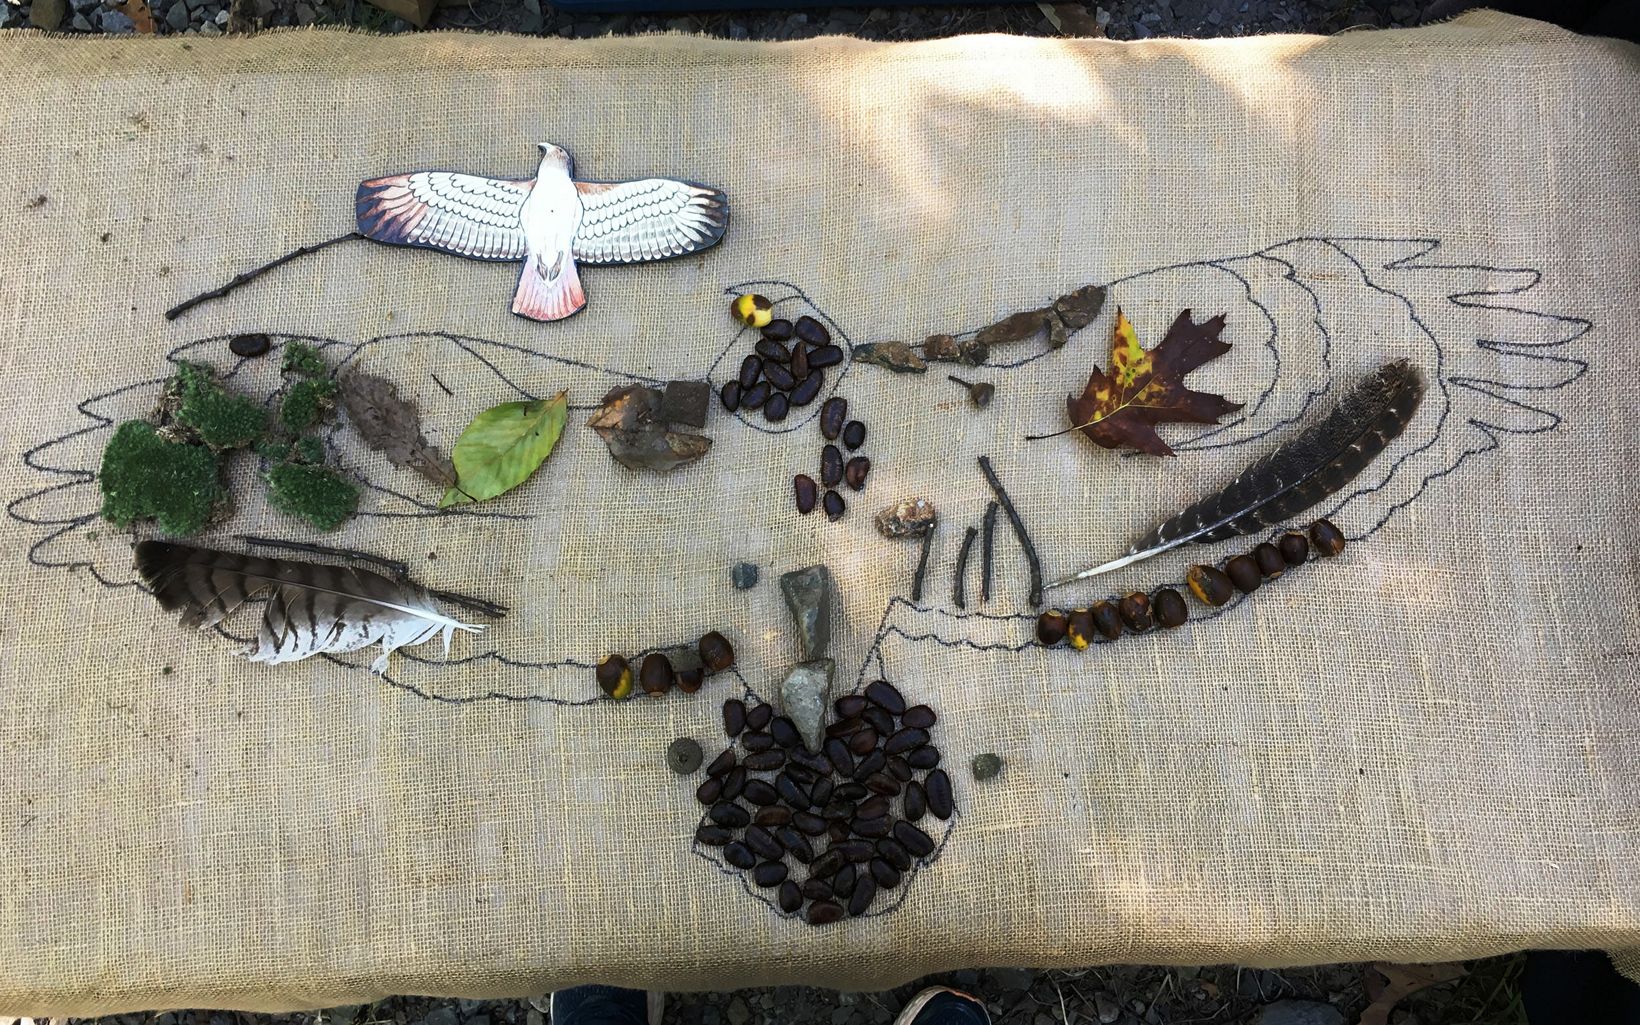 A collection of feathers, leaves, moss and other treasures.